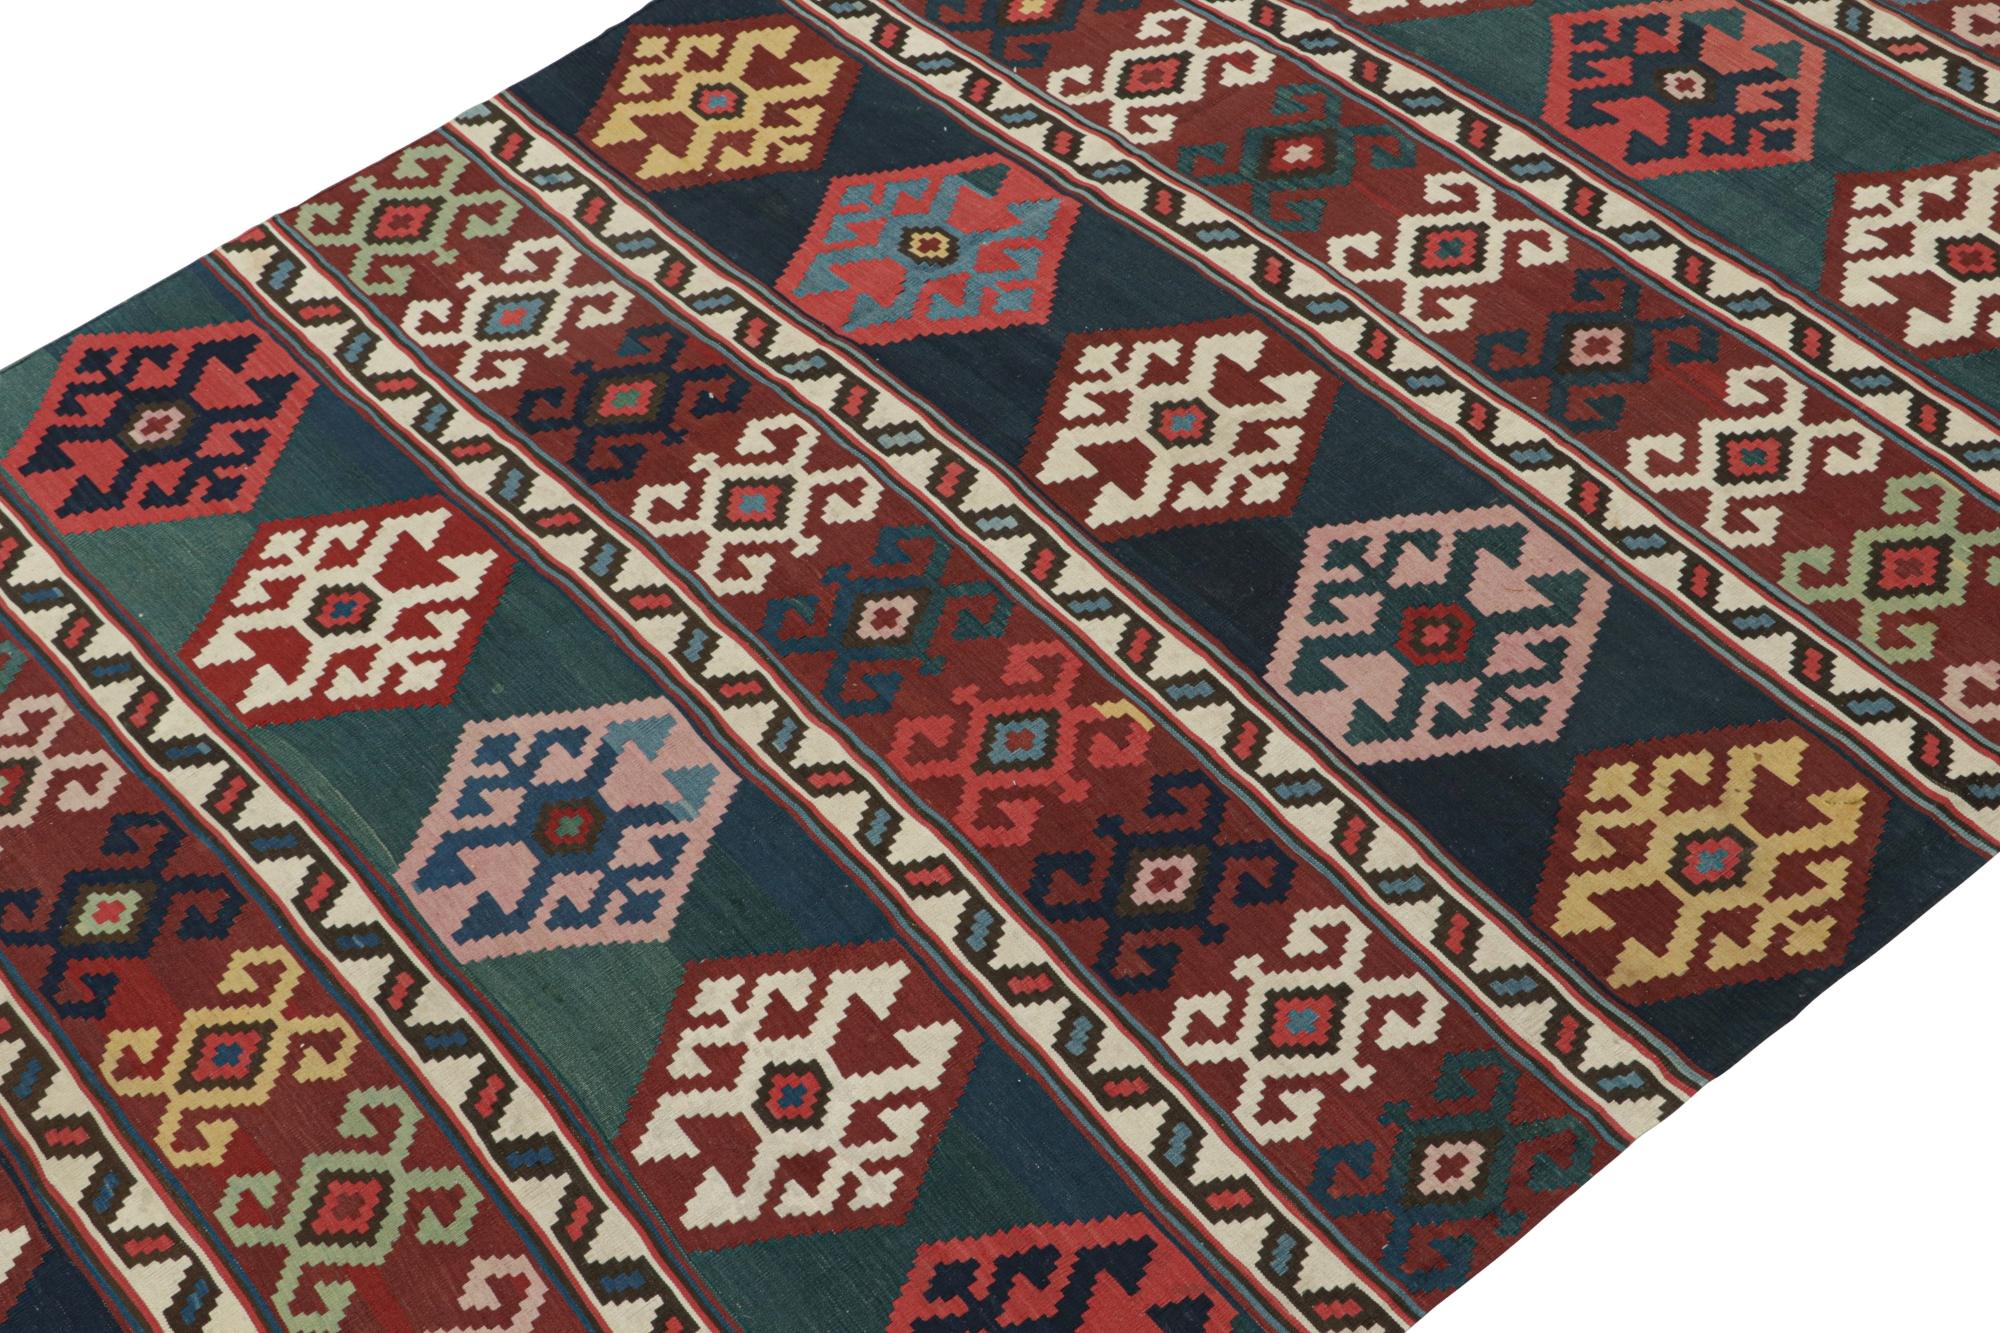 This vintage 7x15 Persian kilim is a particularly rare gallery runner believed to hail from Azerbaijan—handwoven in wool circa 1950-1960.

On the Design:

This piece enjoys sharp tribal geometric patterns in rare, crisp colors that have aged more